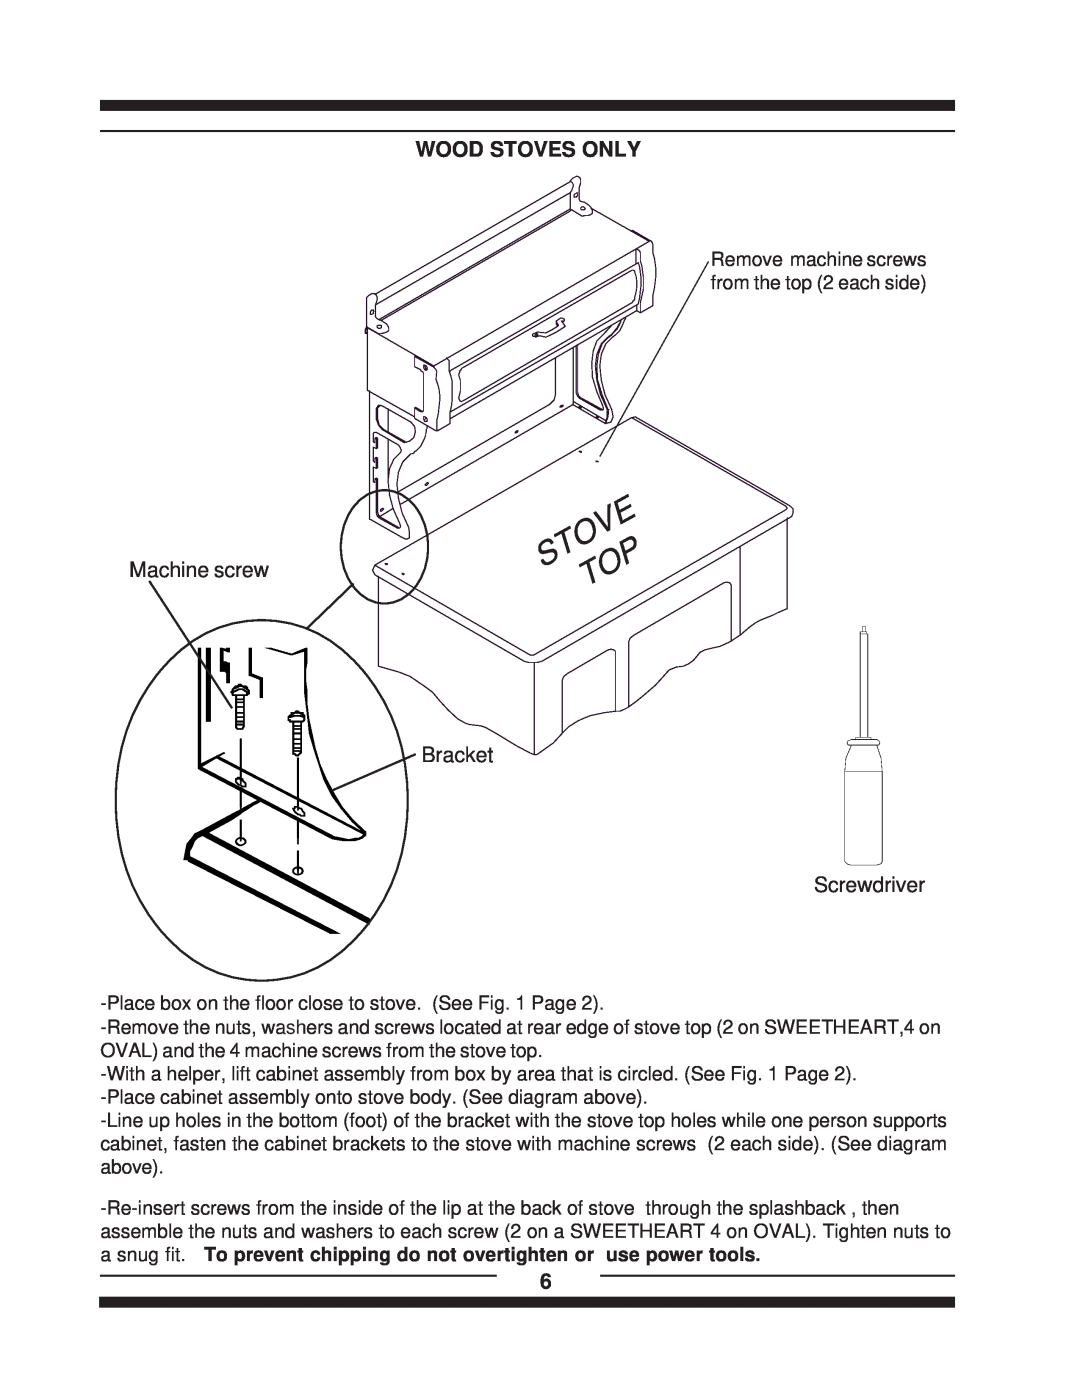 Heartland 8210, 6210, 1903, 1902, 2602, 2603, 8200, 620, 7200, 9200 installation instructions Stove Top, Wood Stoves Only 